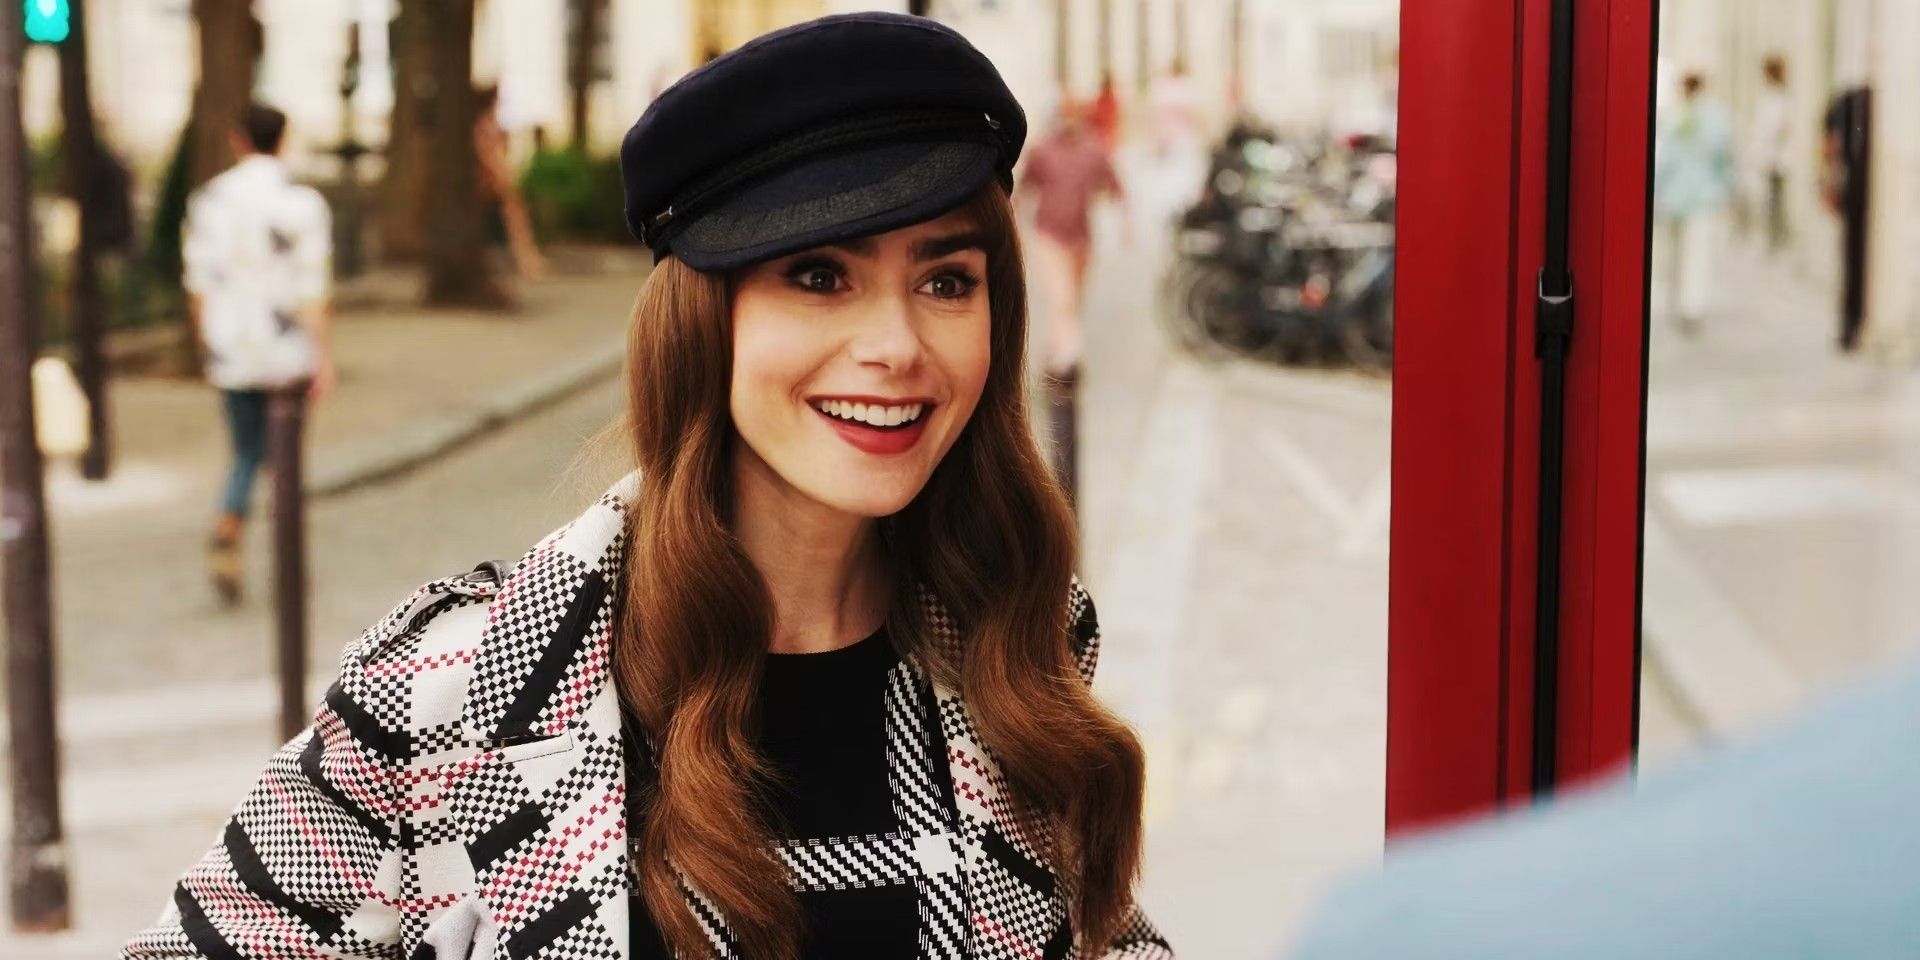 Lily Collins smiling in a scene from Emily in Paris season 3